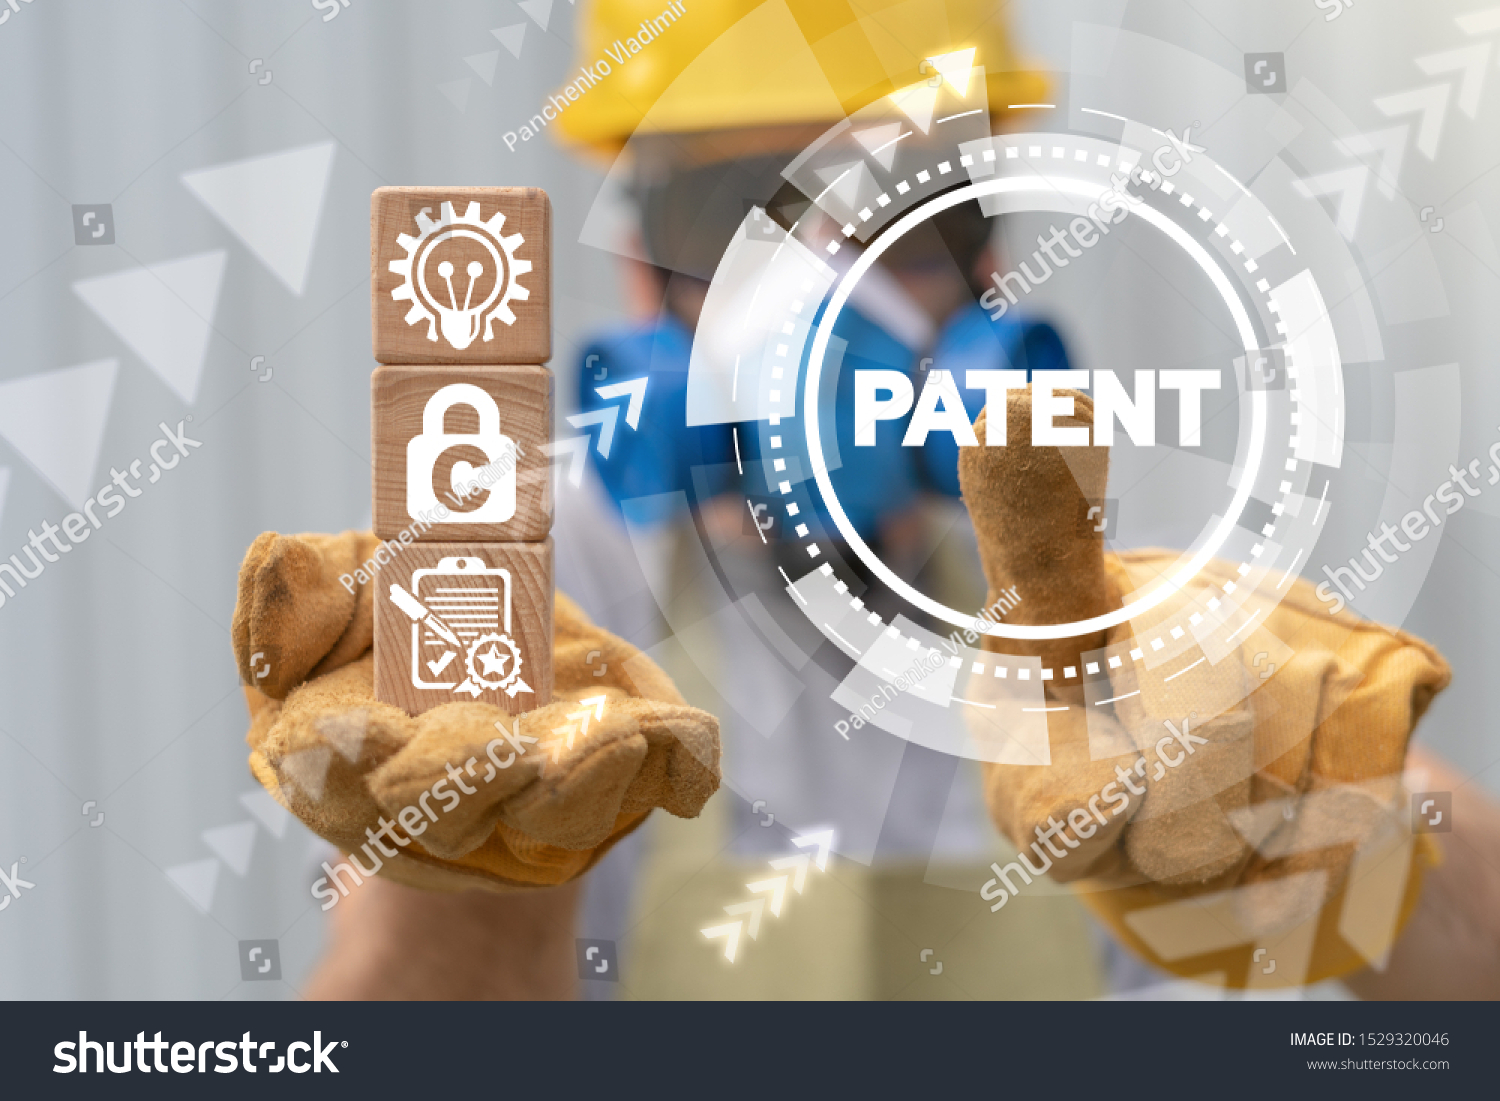 Patent Industry concept. Patented industrial innovative invention and technology. #1529320046